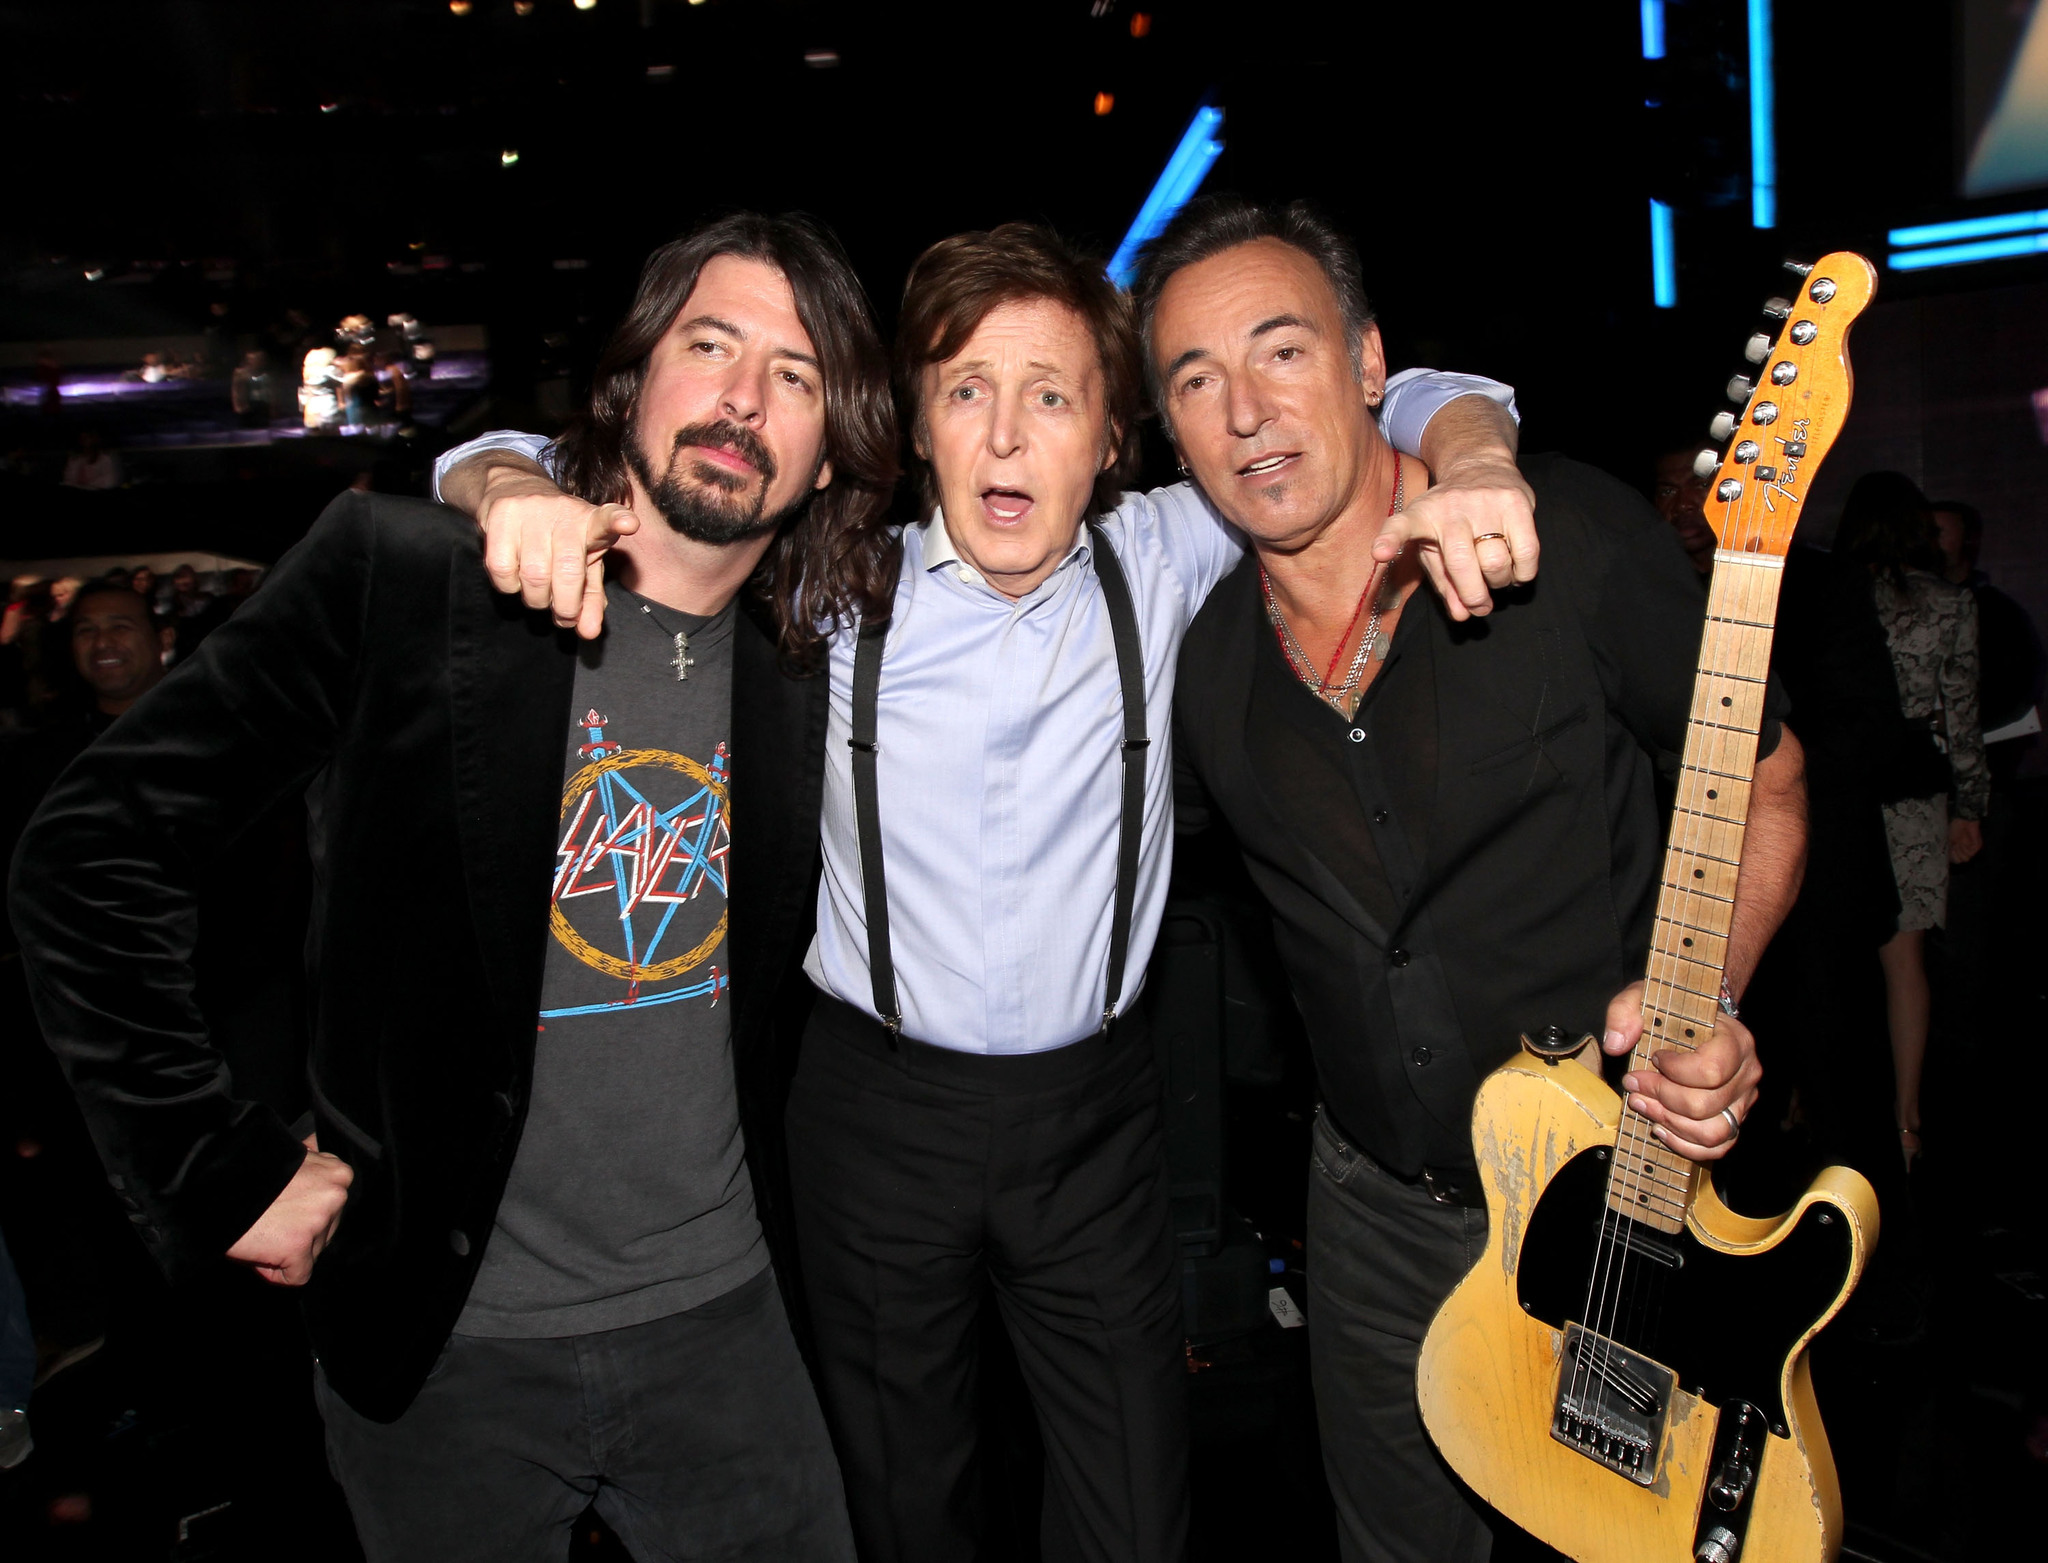 Paul McCartney, Dave Grohl and Bruce Springsteen